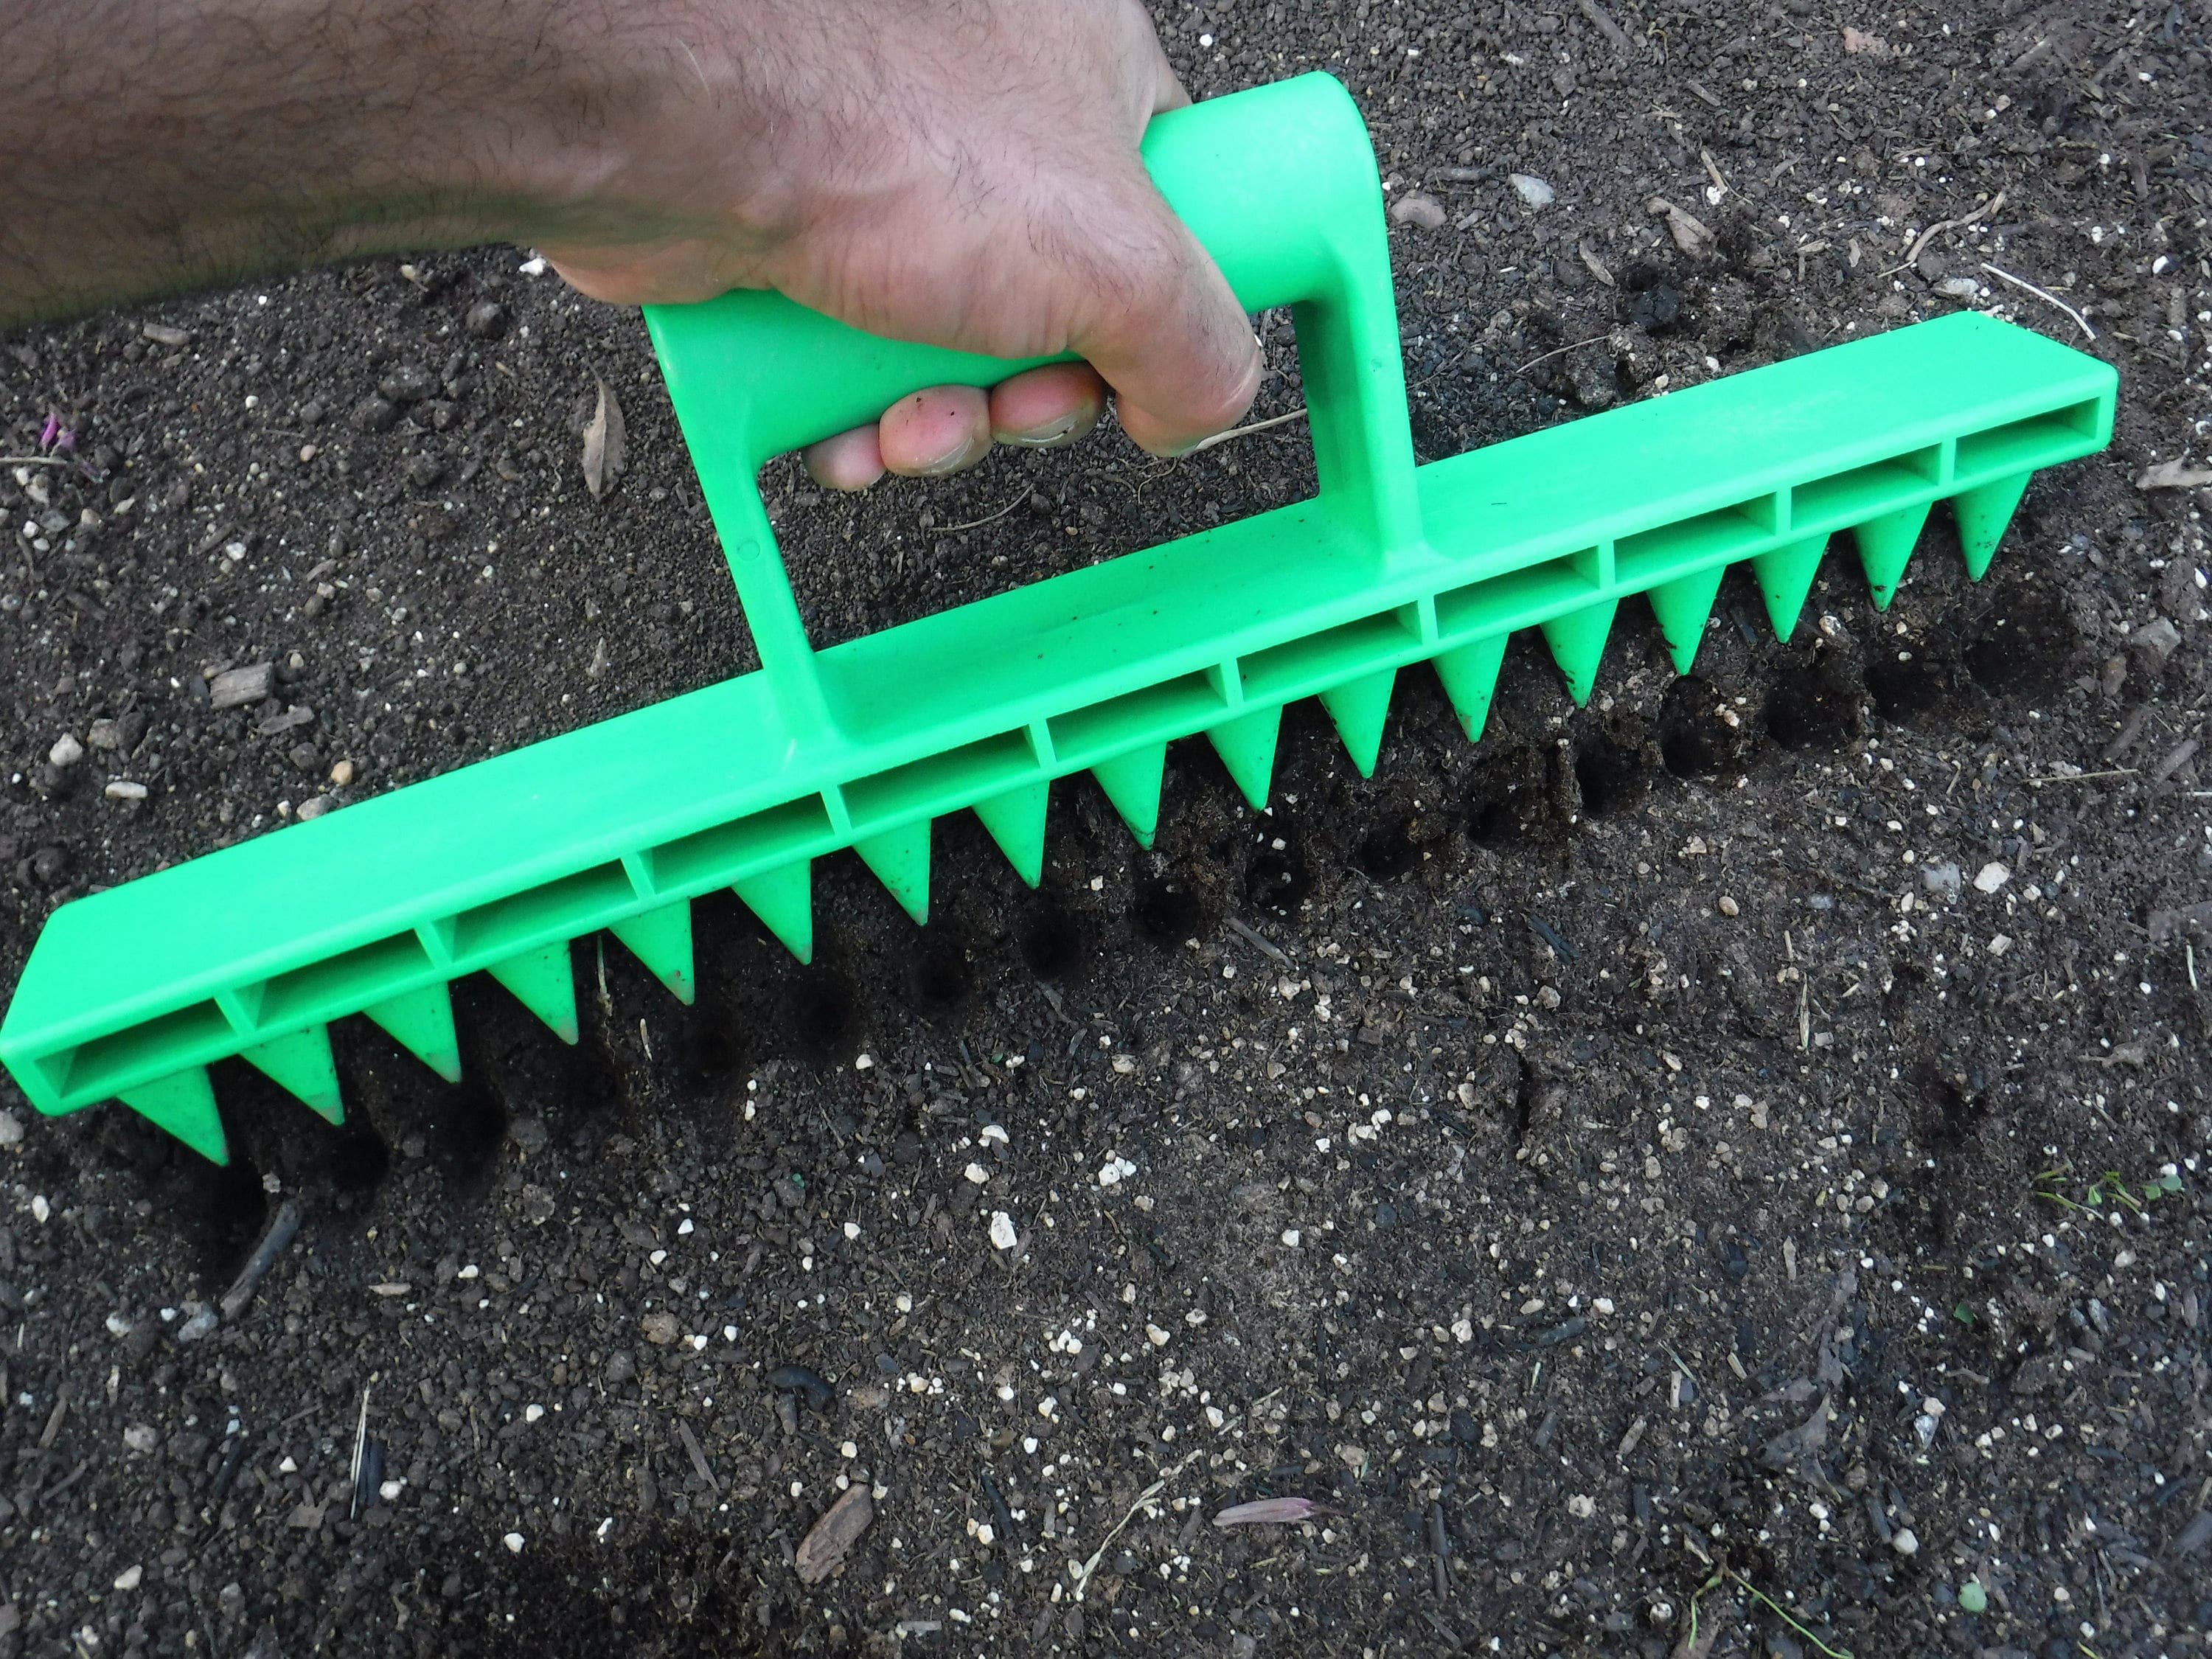  Gardinnovations 24-Hole Soil Digger and Seed Spacer for  Planting Seeds